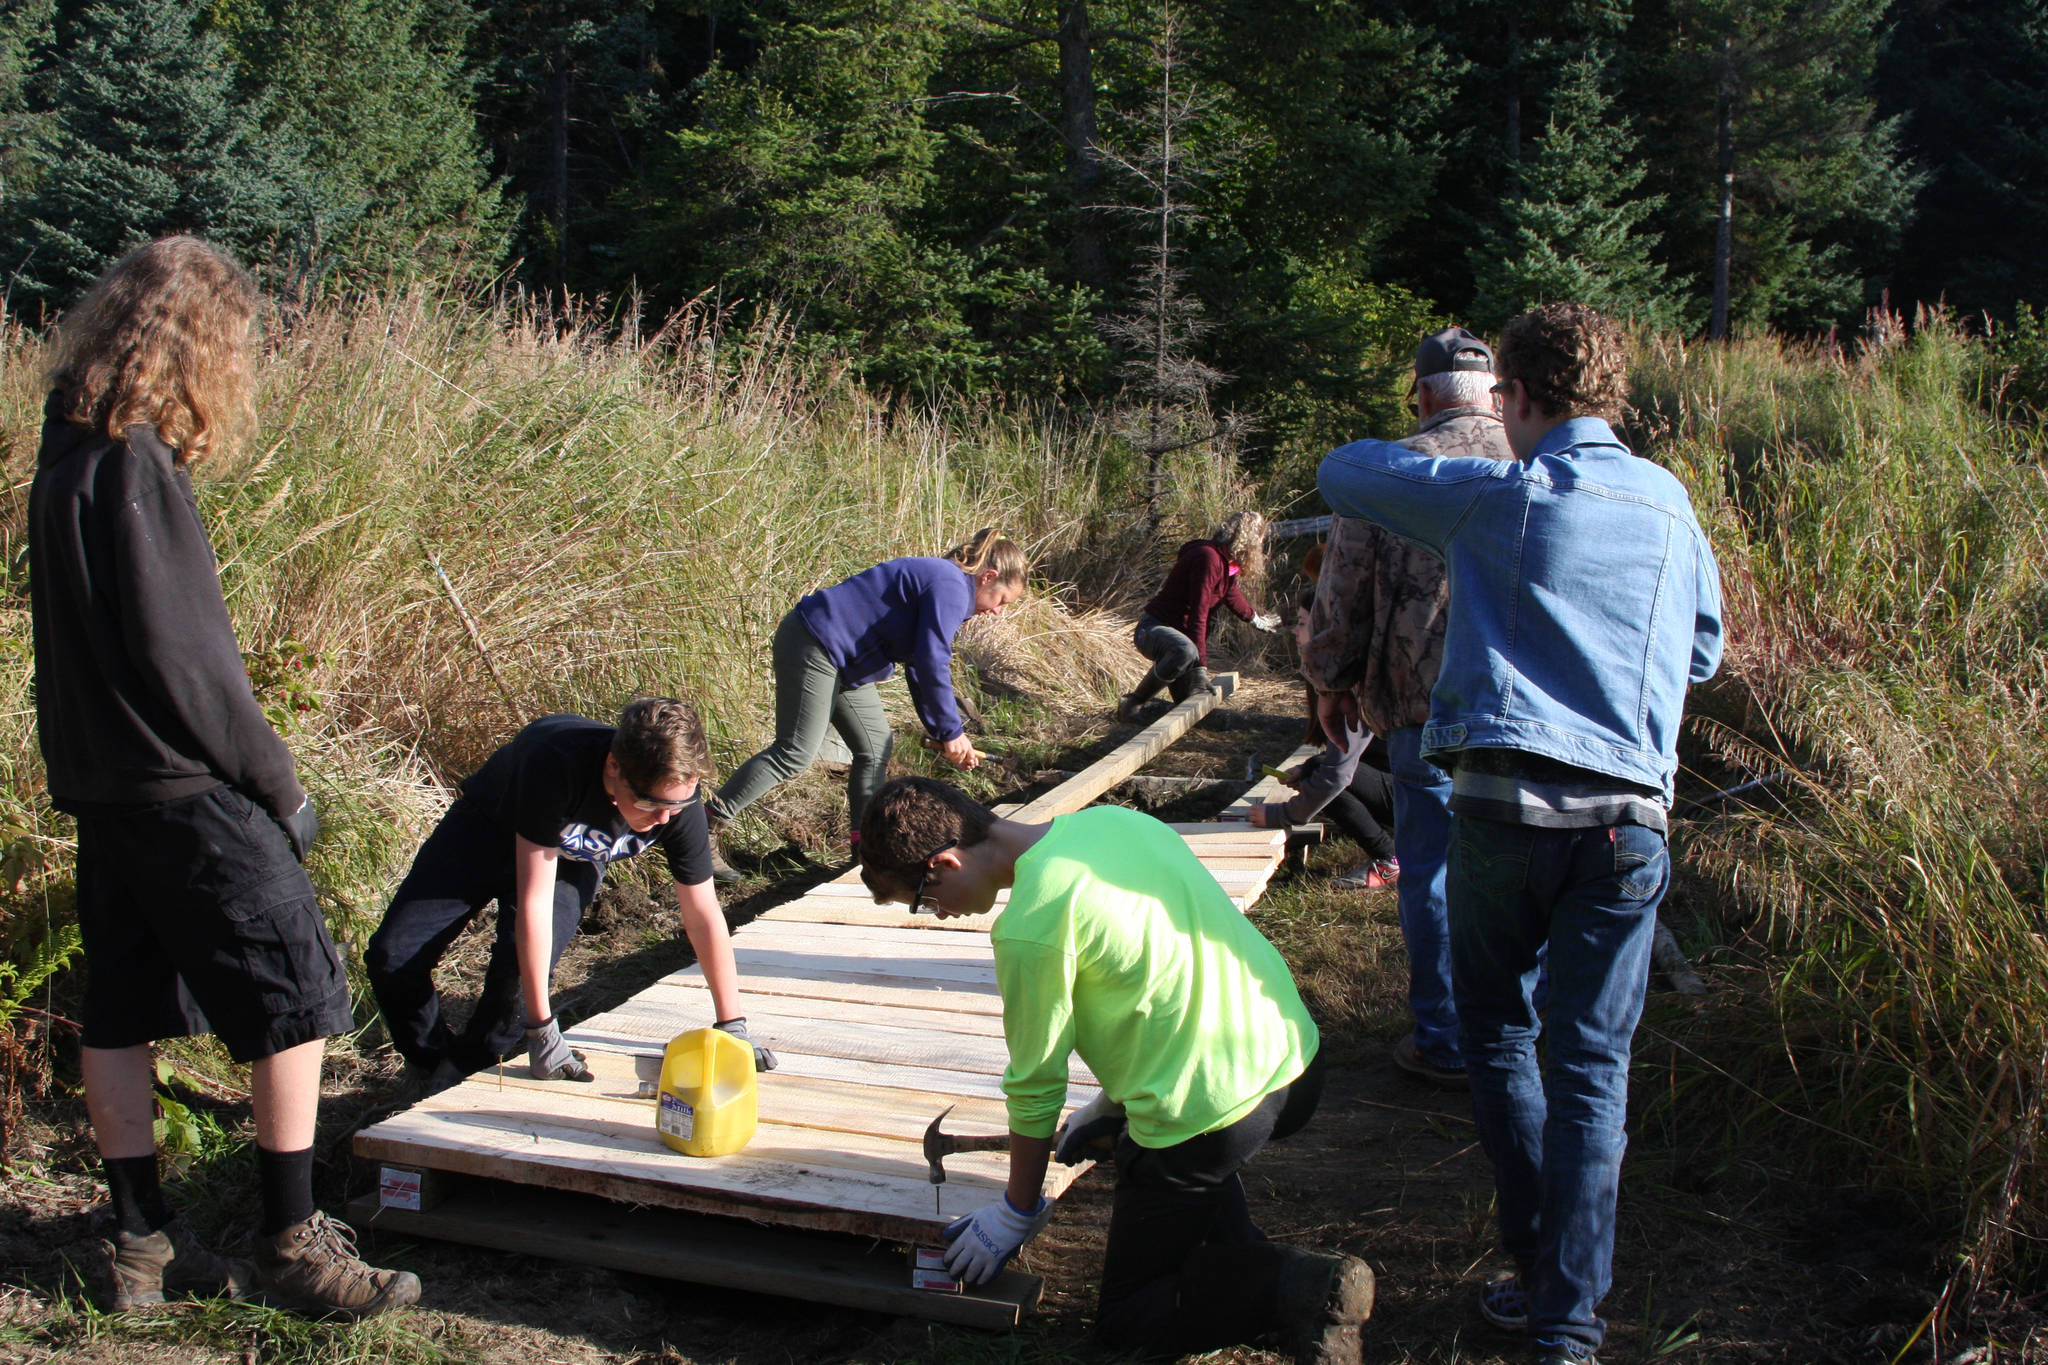 Homer Middle School eighth-grade students construct the eastern loop boardwalk on the middle school trail during the restoration event on Wednesday, Sept. 12, 2018, in Homer, Alaska. (Photo by Delcenia Cosman)